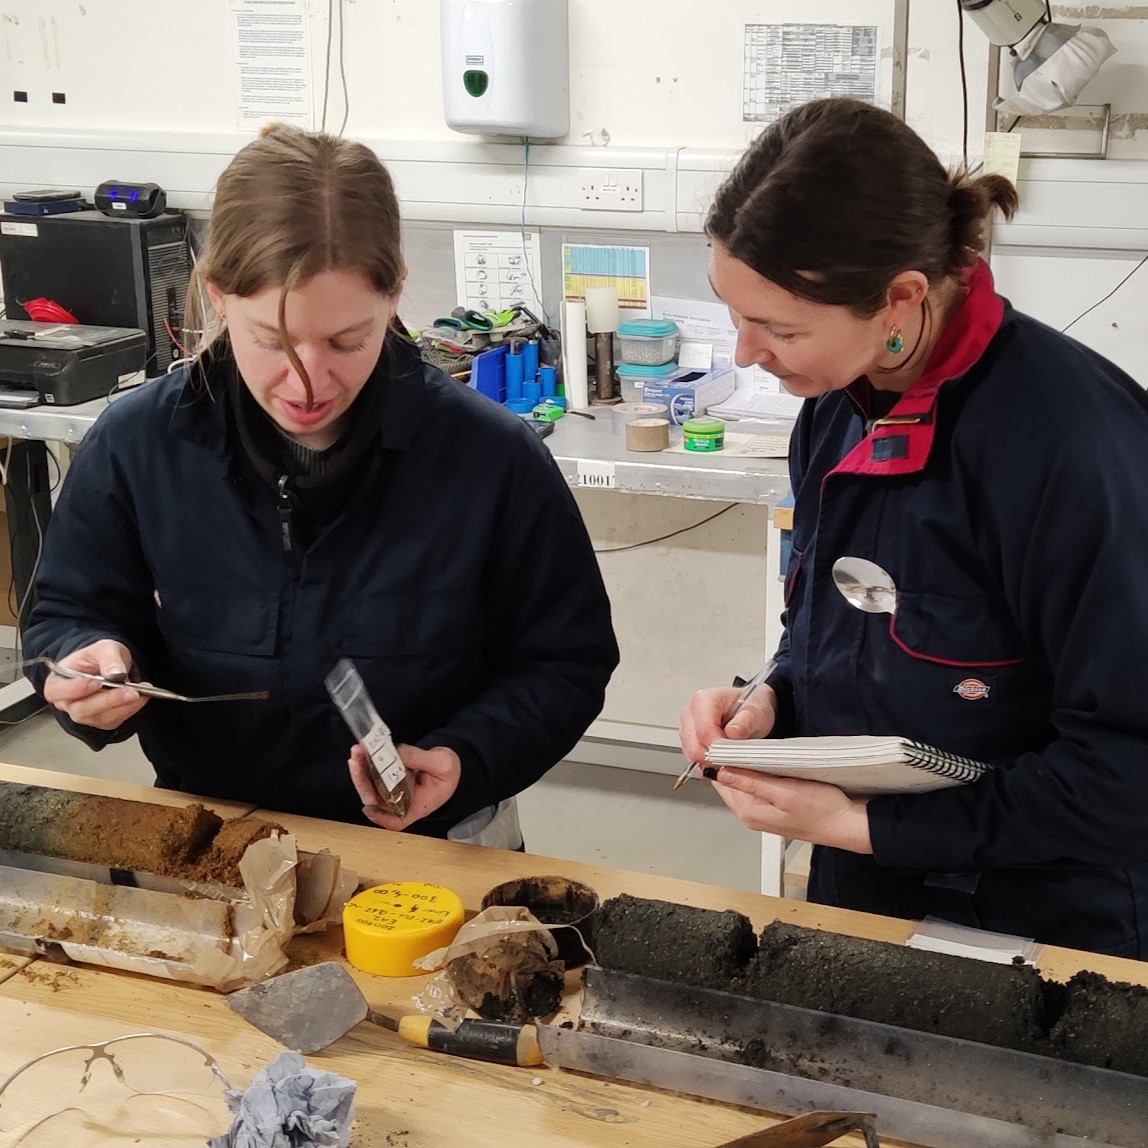 Happy International Women’s Day! Our workforce is 85% female and the work we do includes outreach, desk-based assessments, intertidal excavation, working offshore and diving submerged sites. Who does this work is never based on gender and we aim to #InspireInclusion every day.